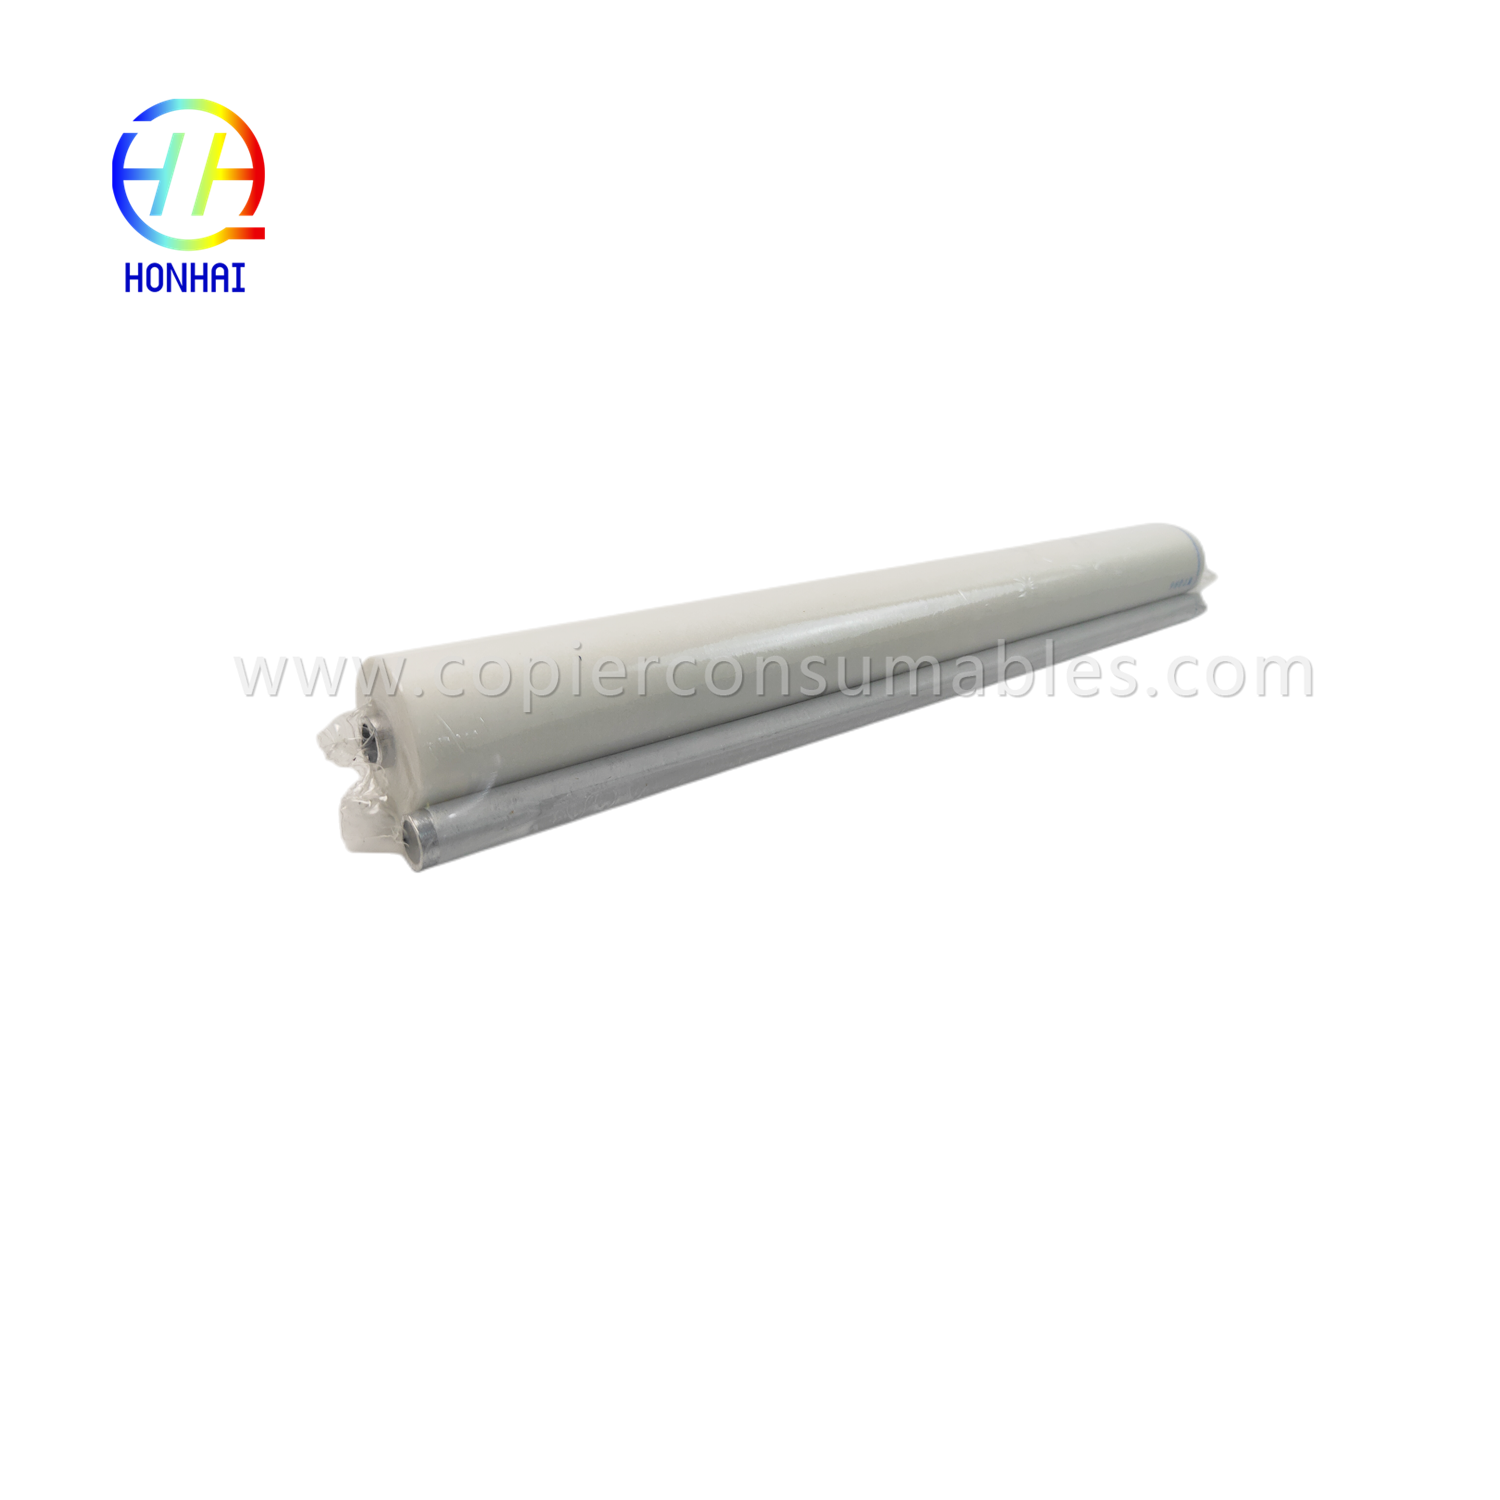 https://c585.goodao.net/fuser-cleaning-web-for-canon-ir6800-ir-8085-8095-8105-8205-8285-8295-fq-009-fc5-2286-000-oem-fuser- cleaning-fuser-roller-proizvod/